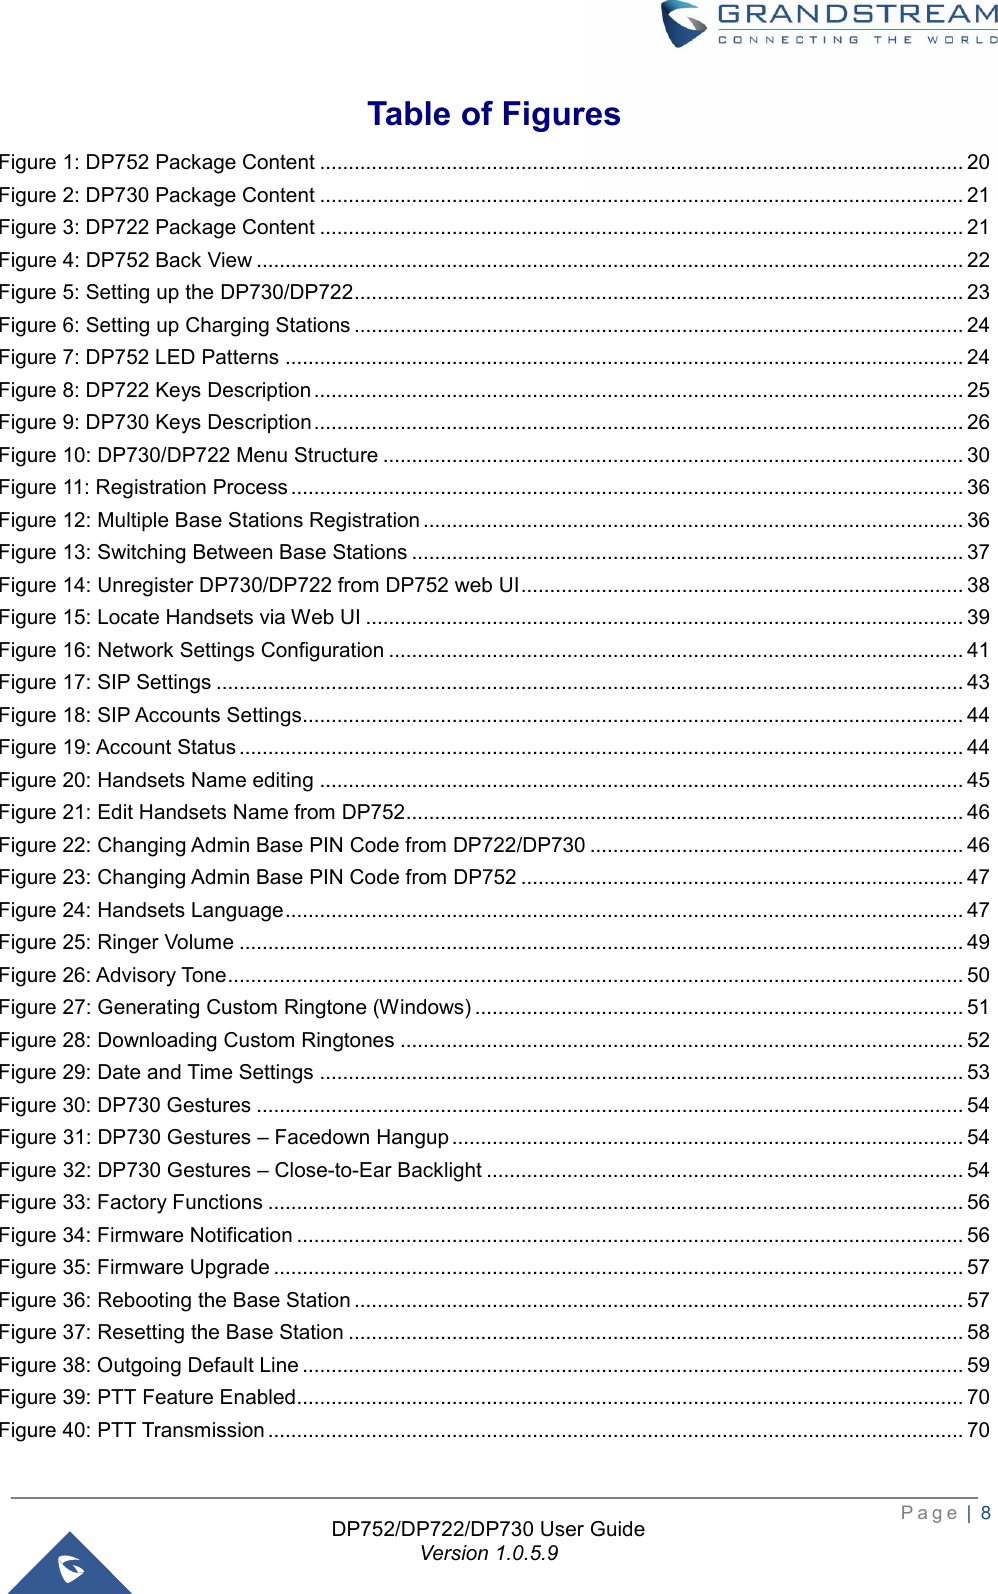  P a g e  |  8   DP752/DP722/DP730 User Guide Version 1.0.5.9   Table of Figures Figure 1: DP752 Package Content ................................................................................................................ 20 Figure 2: DP730 Package Content ................................................................................................................ 21 Figure 3: DP722 Package Content ................................................................................................................ 21 Figure 4: DP752 Back View ........................................................................................................................... 22 Figure 5: Setting up the DP730/DP722 .......................................................................................................... 23 Figure 6: Setting up Charging Stations .......................................................................................................... 24 Figure 7: DP752 LED Patterns ...................................................................................................................... 24 Figure 8: DP722 Keys Description ................................................................................................................. 25 Figure 9: DP730 Keys Description ................................................................................................................. 26 Figure 10: DP730/DP722 Menu Structure ..................................................................................................... 30 Figure 11: Registration Process ..................................................................................................................... 36 Figure 12: Multiple Base Stations Registration .............................................................................................. 36 Figure 13: Switching Between Base Stations ................................................................................................ 37 Figure 14: Unregister DP730/DP722 from DP752 web UI ............................................................................. 38 Figure 15: Locate Handsets via Web UI ........................................................................................................ 39 Figure 16: Network Settings Configuration .................................................................................................... 41 Figure 17: SIP Settings .................................................................................................................................. 43 Figure 18: SIP Accounts Settings................................................................................................................... 44 Figure 19: Account Status .............................................................................................................................. 44 Figure 20: Handsets Name editing ................................................................................................................ 45 Figure 21: Edit Handsets Name from DP752................................................................................................. 46 Figure 22: Changing Admin Base PIN Code from DP722/DP730 ................................................................. 46 Figure 23: Changing Admin Base PIN Code from DP752 ............................................................................. 47 Figure 24: Handsets Language ...................................................................................................................... 47 Figure 25: Ringer Volume .............................................................................................................................. 49 Figure 26: Advisory Tone ................................................................................................................................ 50 Figure 27: Generating Custom Ringtone (Windows) ..................................................................................... 51 Figure 28: Downloading Custom Ringtones .................................................................................................. 52 Figure 29: Date and Time Settings ................................................................................................................ 53 Figure 30: DP730 Gestures ........................................................................................................................... 54 Figure 31: DP730 Gestures – Facedown Hangup ......................................................................................... 54 Figure 32: DP730 Gestures – Close-to-Ear Backlight ................................................................................... 54 Figure 33: Factory Functions ......................................................................................................................... 56 Figure 34: Firmware Notification .................................................................................................................... 56 Figure 35: Firmware Upgrade ........................................................................................................................ 57 Figure 36: Rebooting the Base Station .......................................................................................................... 57 Figure 37: Resetting the Base Station ........................................................................................................... 58 Figure 38: Outgoing Default Line ................................................................................................................... 59 Figure 39: PTT Feature Enabled.................................................................................................................... 70 Figure 40: PTT Transmission ......................................................................................................................... 70  